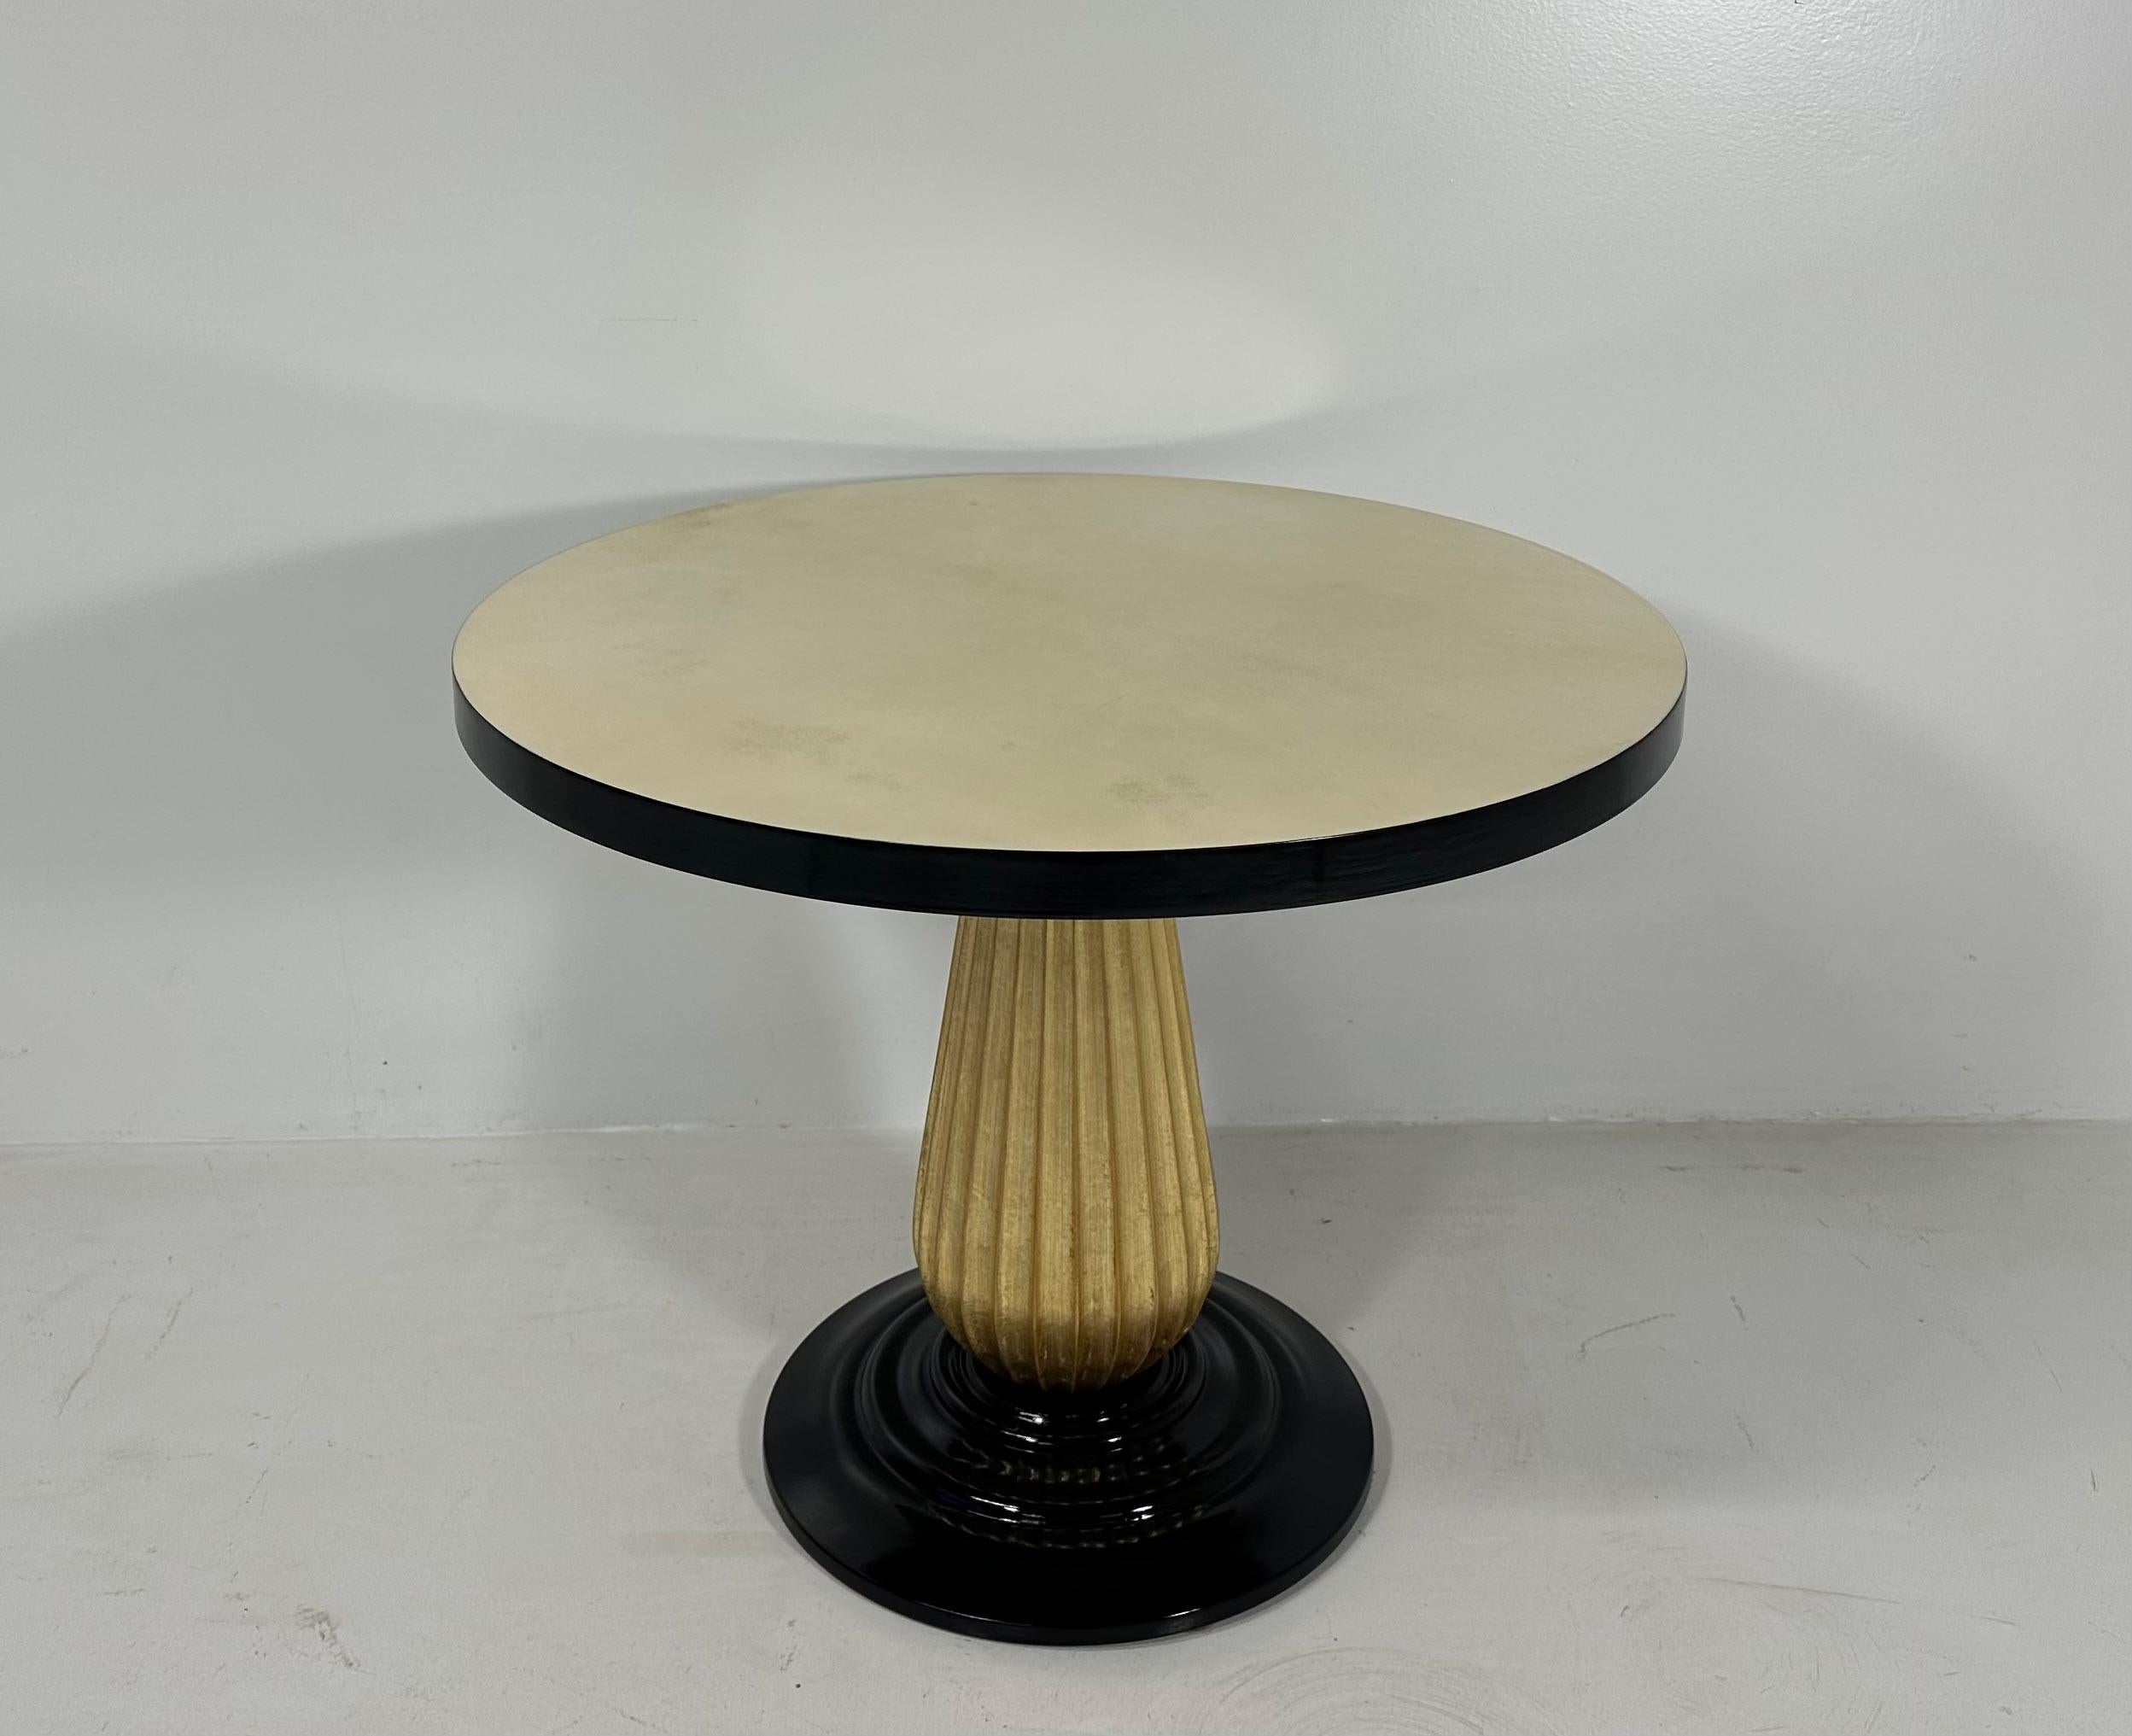 Italian Art Deco Style Parchment, Black lacquer and Gold Leaf Coffee Table In Good Condition For Sale In Meda, MB